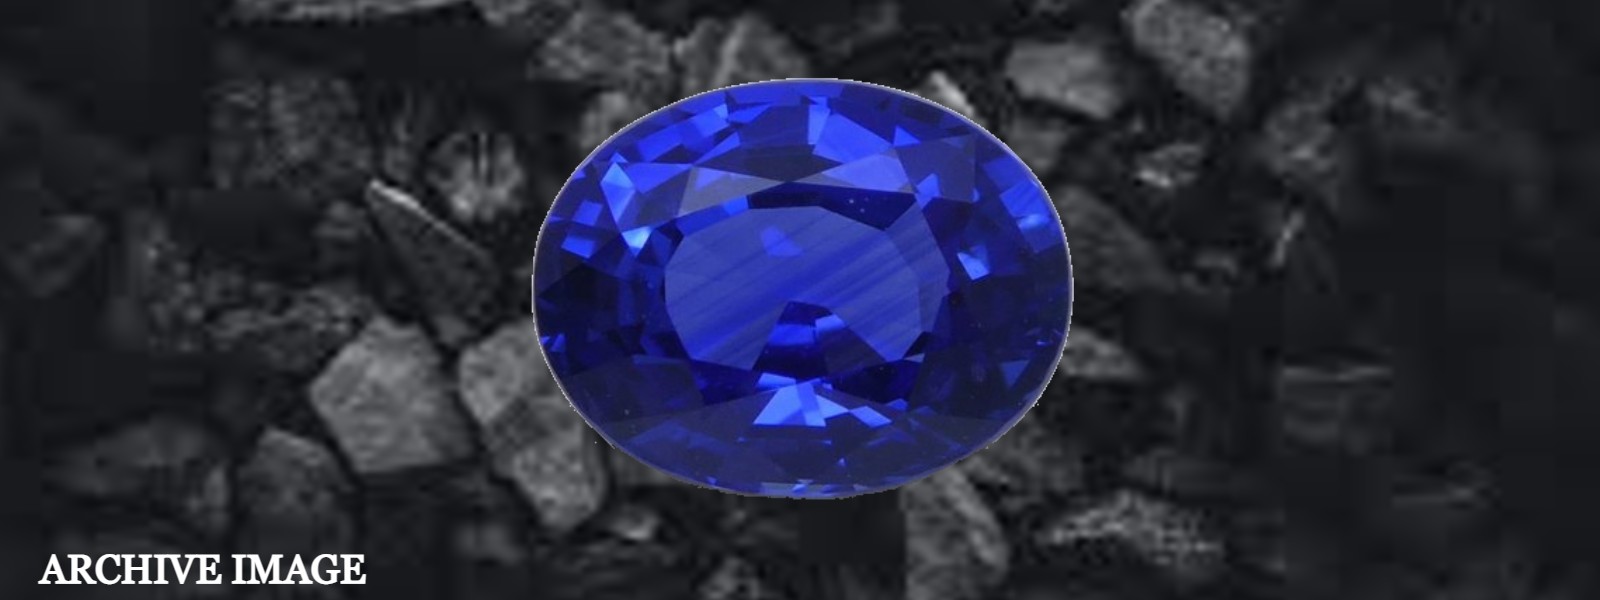 Blue Sapphire weighing 80 kg discovered from a mine in Rakwana